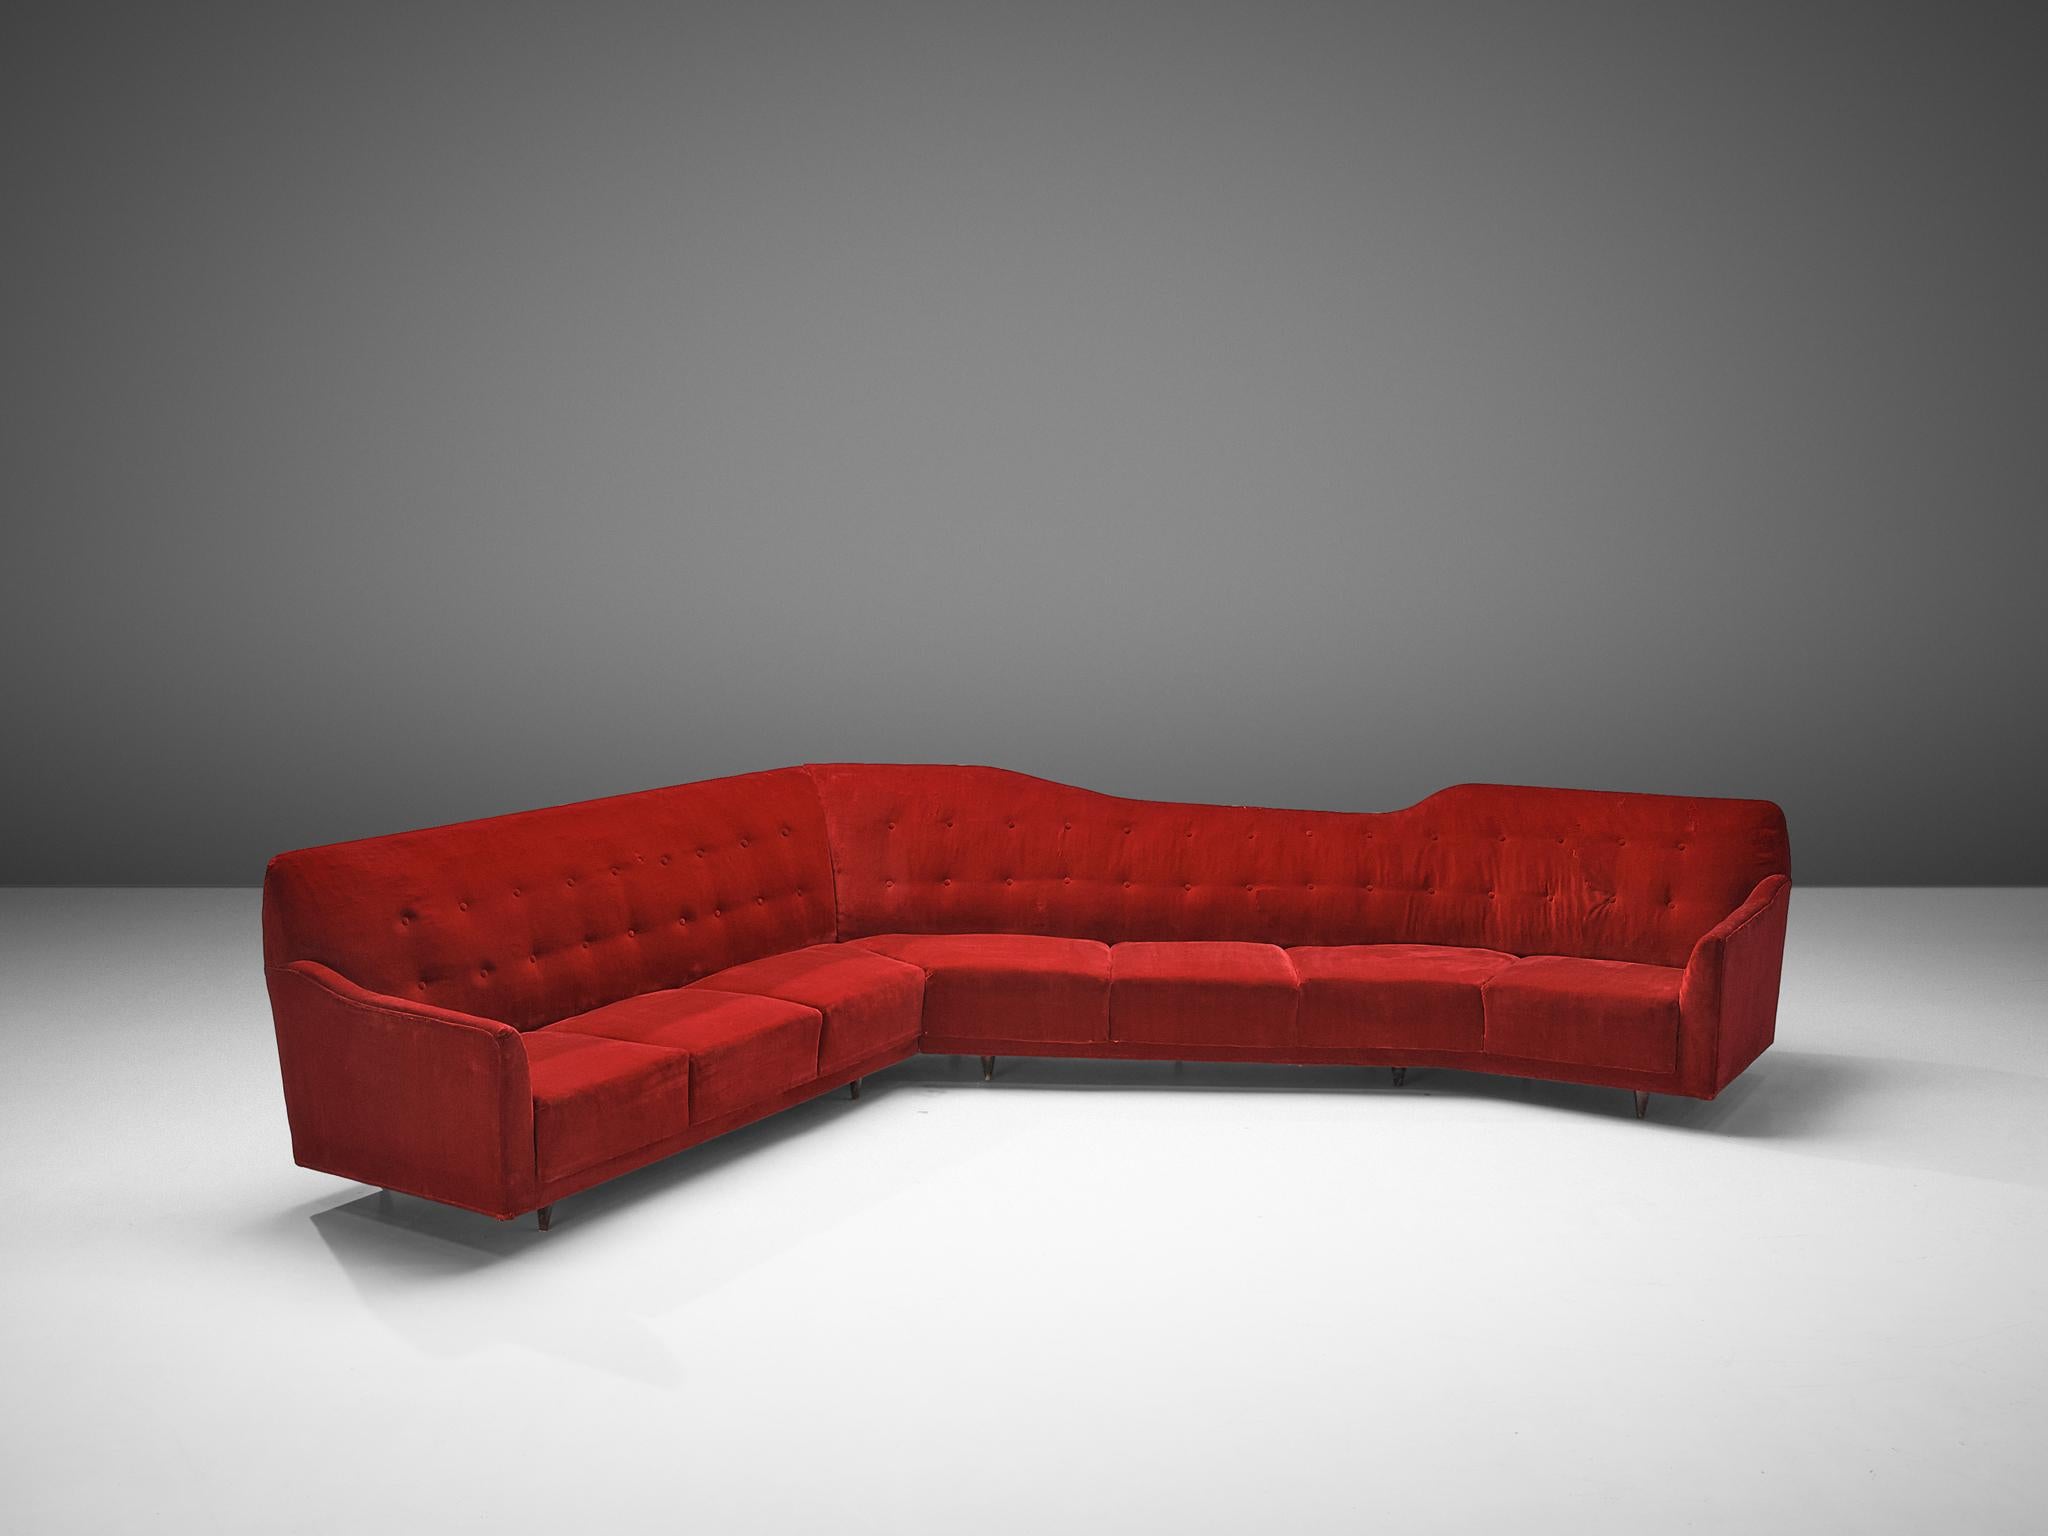 Sofa, velvet, wood, Italy, 1950s

Beautiful and very spacious sofa dating back to the 1950s, crafted in Italy.  This corner sofa is an eye-catching piece that has all the characteristics of mid-modern design. Not only does the sofa embrace an